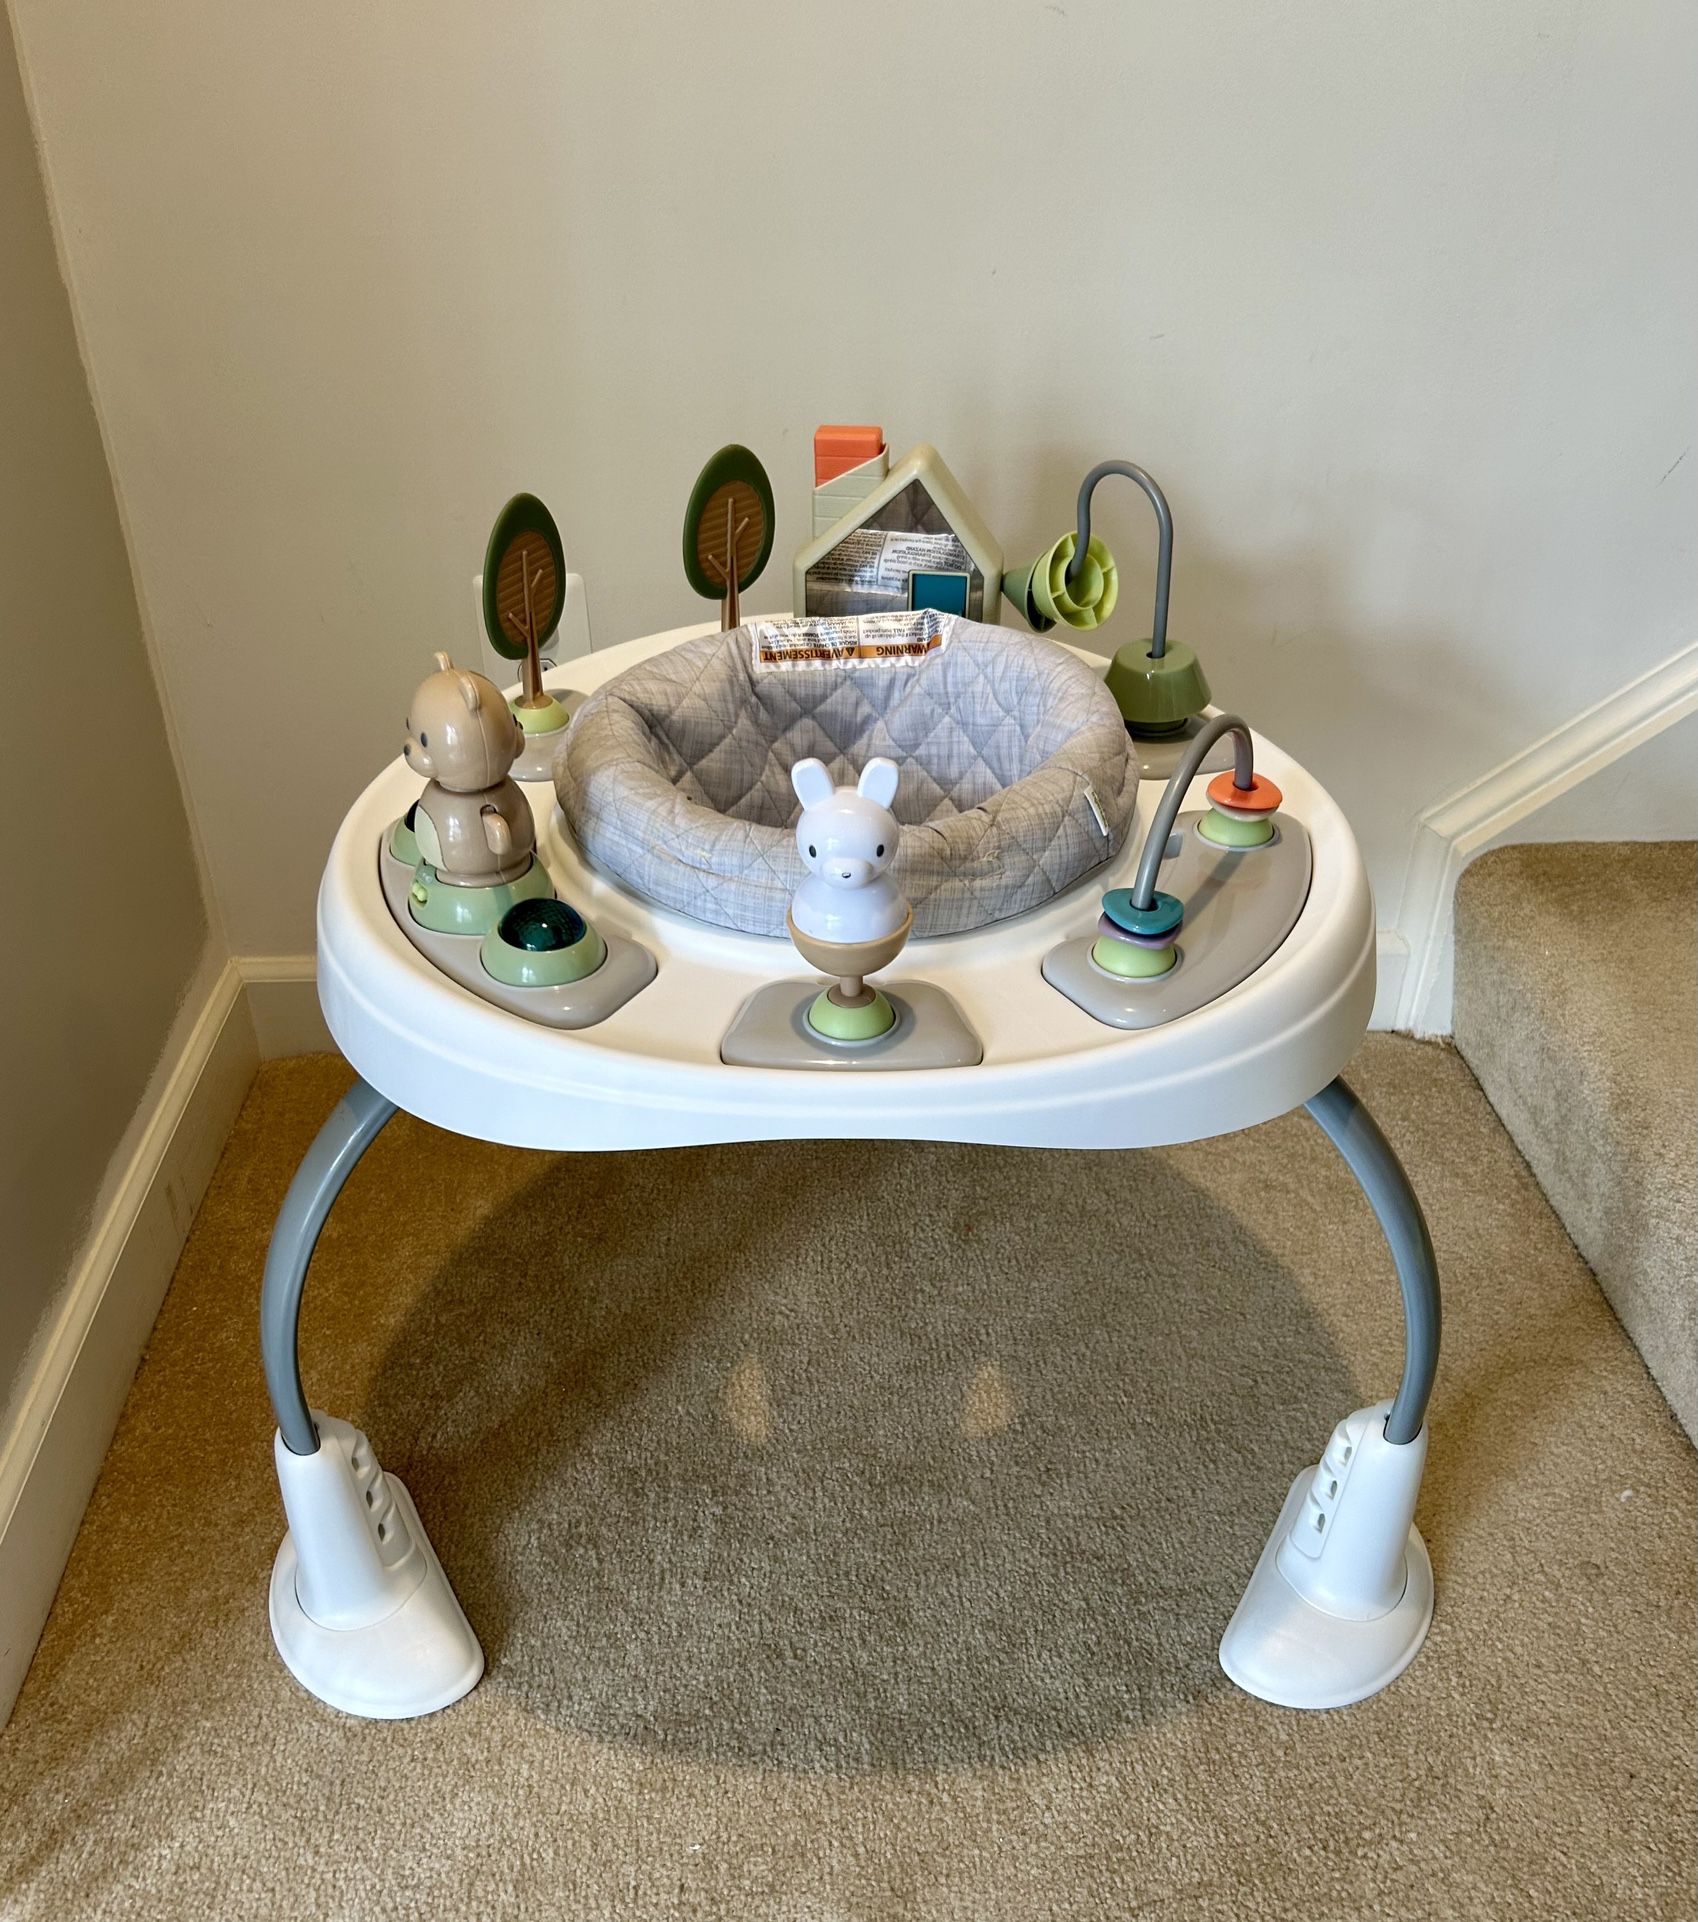 Ingenuity Baby Activity Center / Table with Infant Toys - Very Clean!